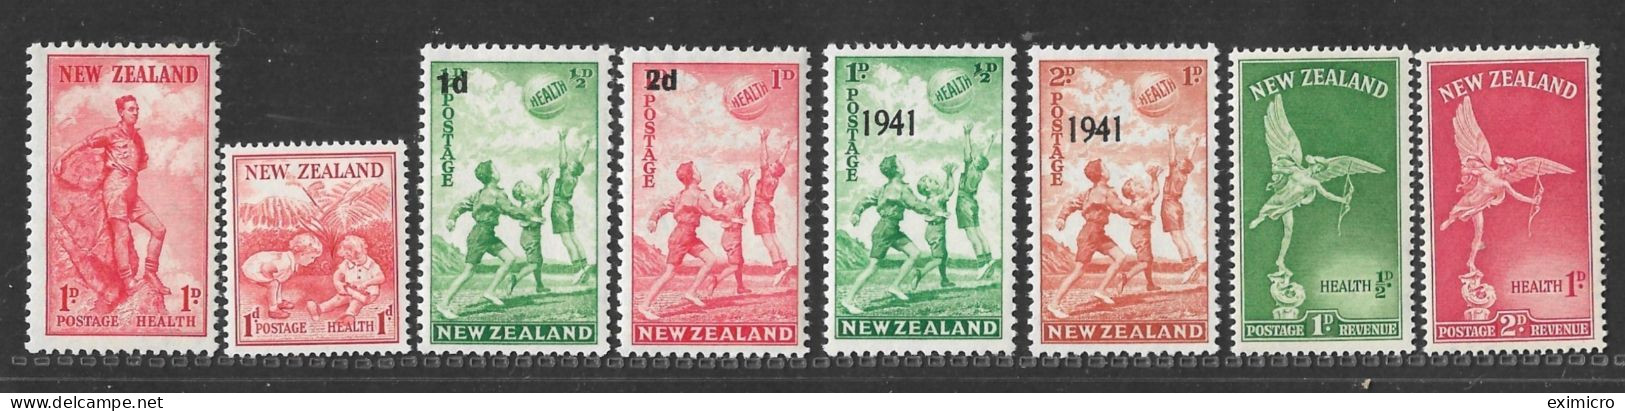 NEW ZEALAND UNMOUNTED MINT COLLECTION OF HEALTH SETS 1937,1938,1939,1941,1947 Cat £19.85 - Nuovi